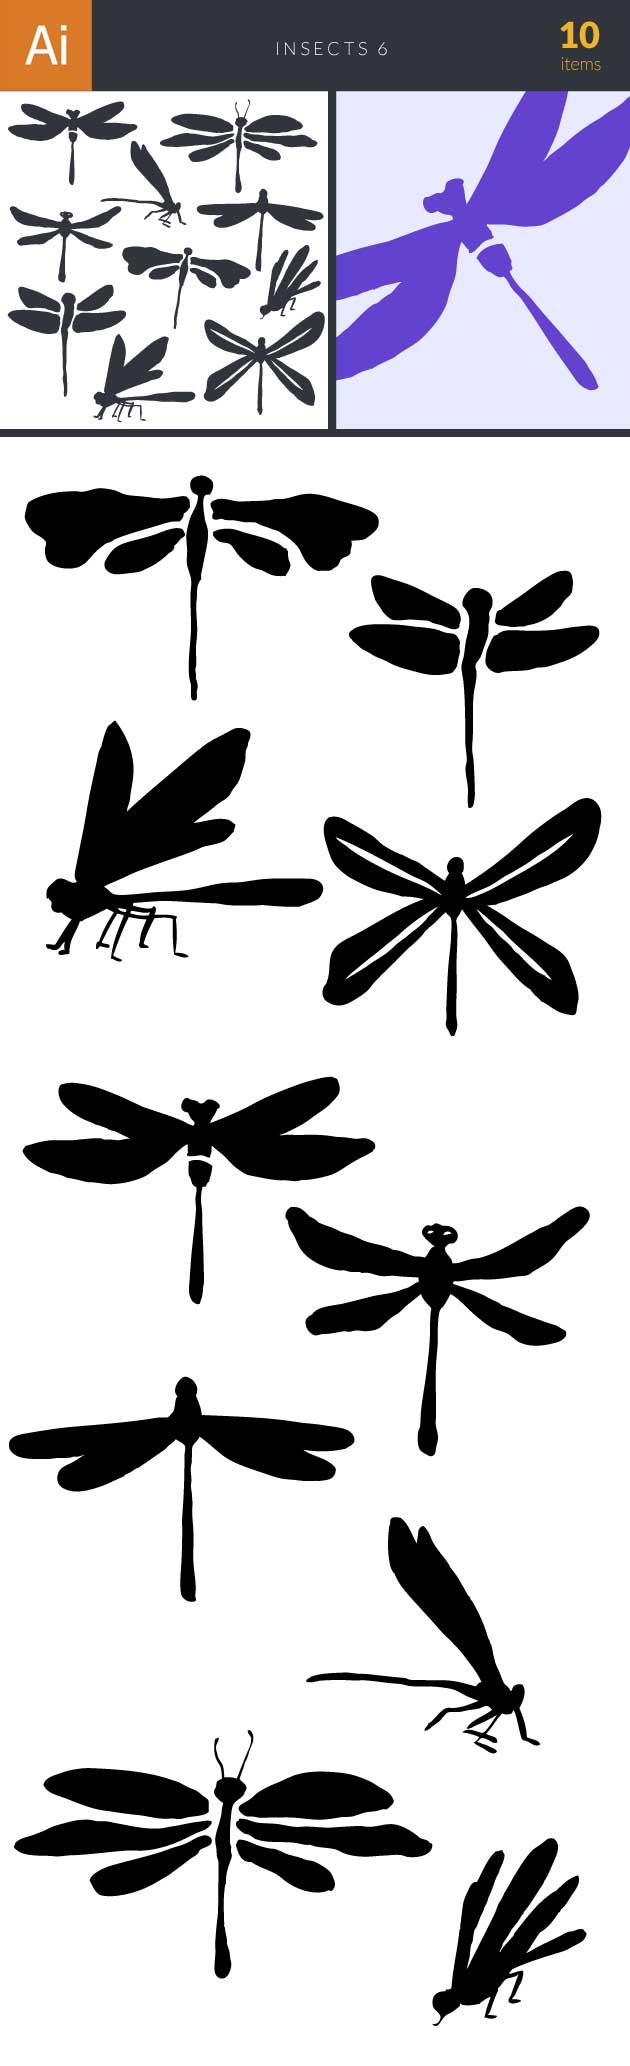 Insects Vector Set 6 2